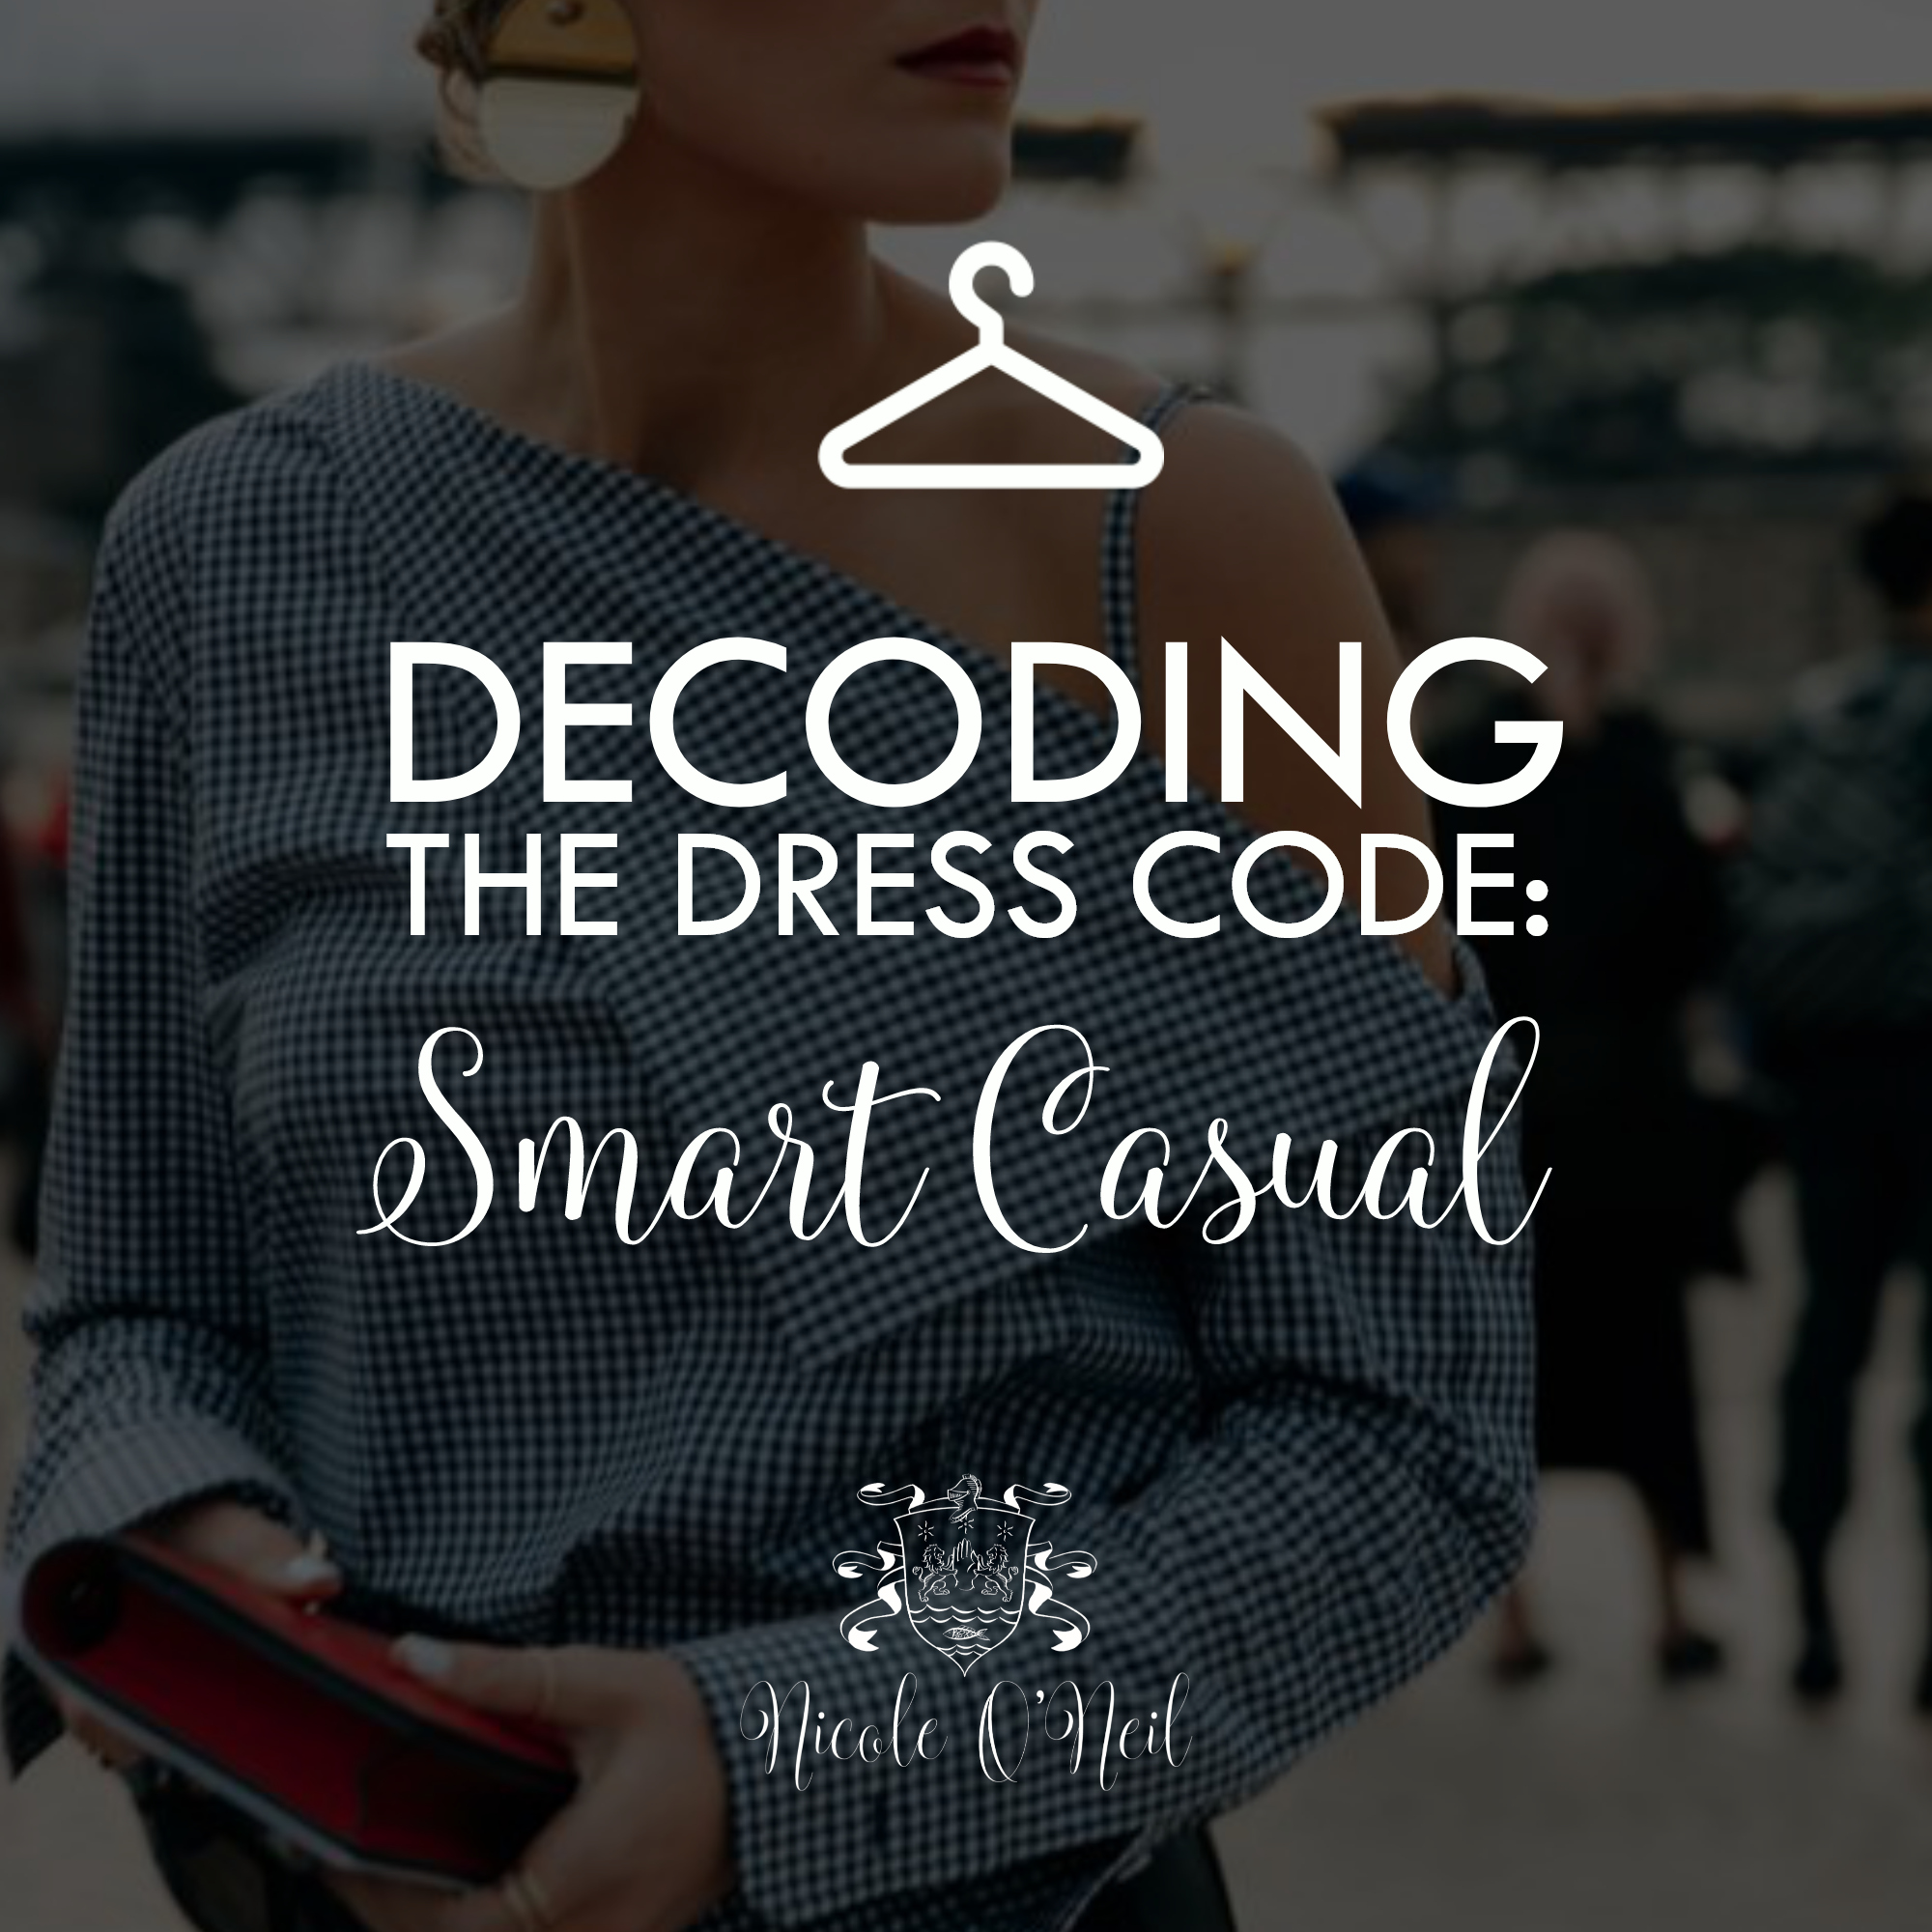 smart casual women's outfits wedding